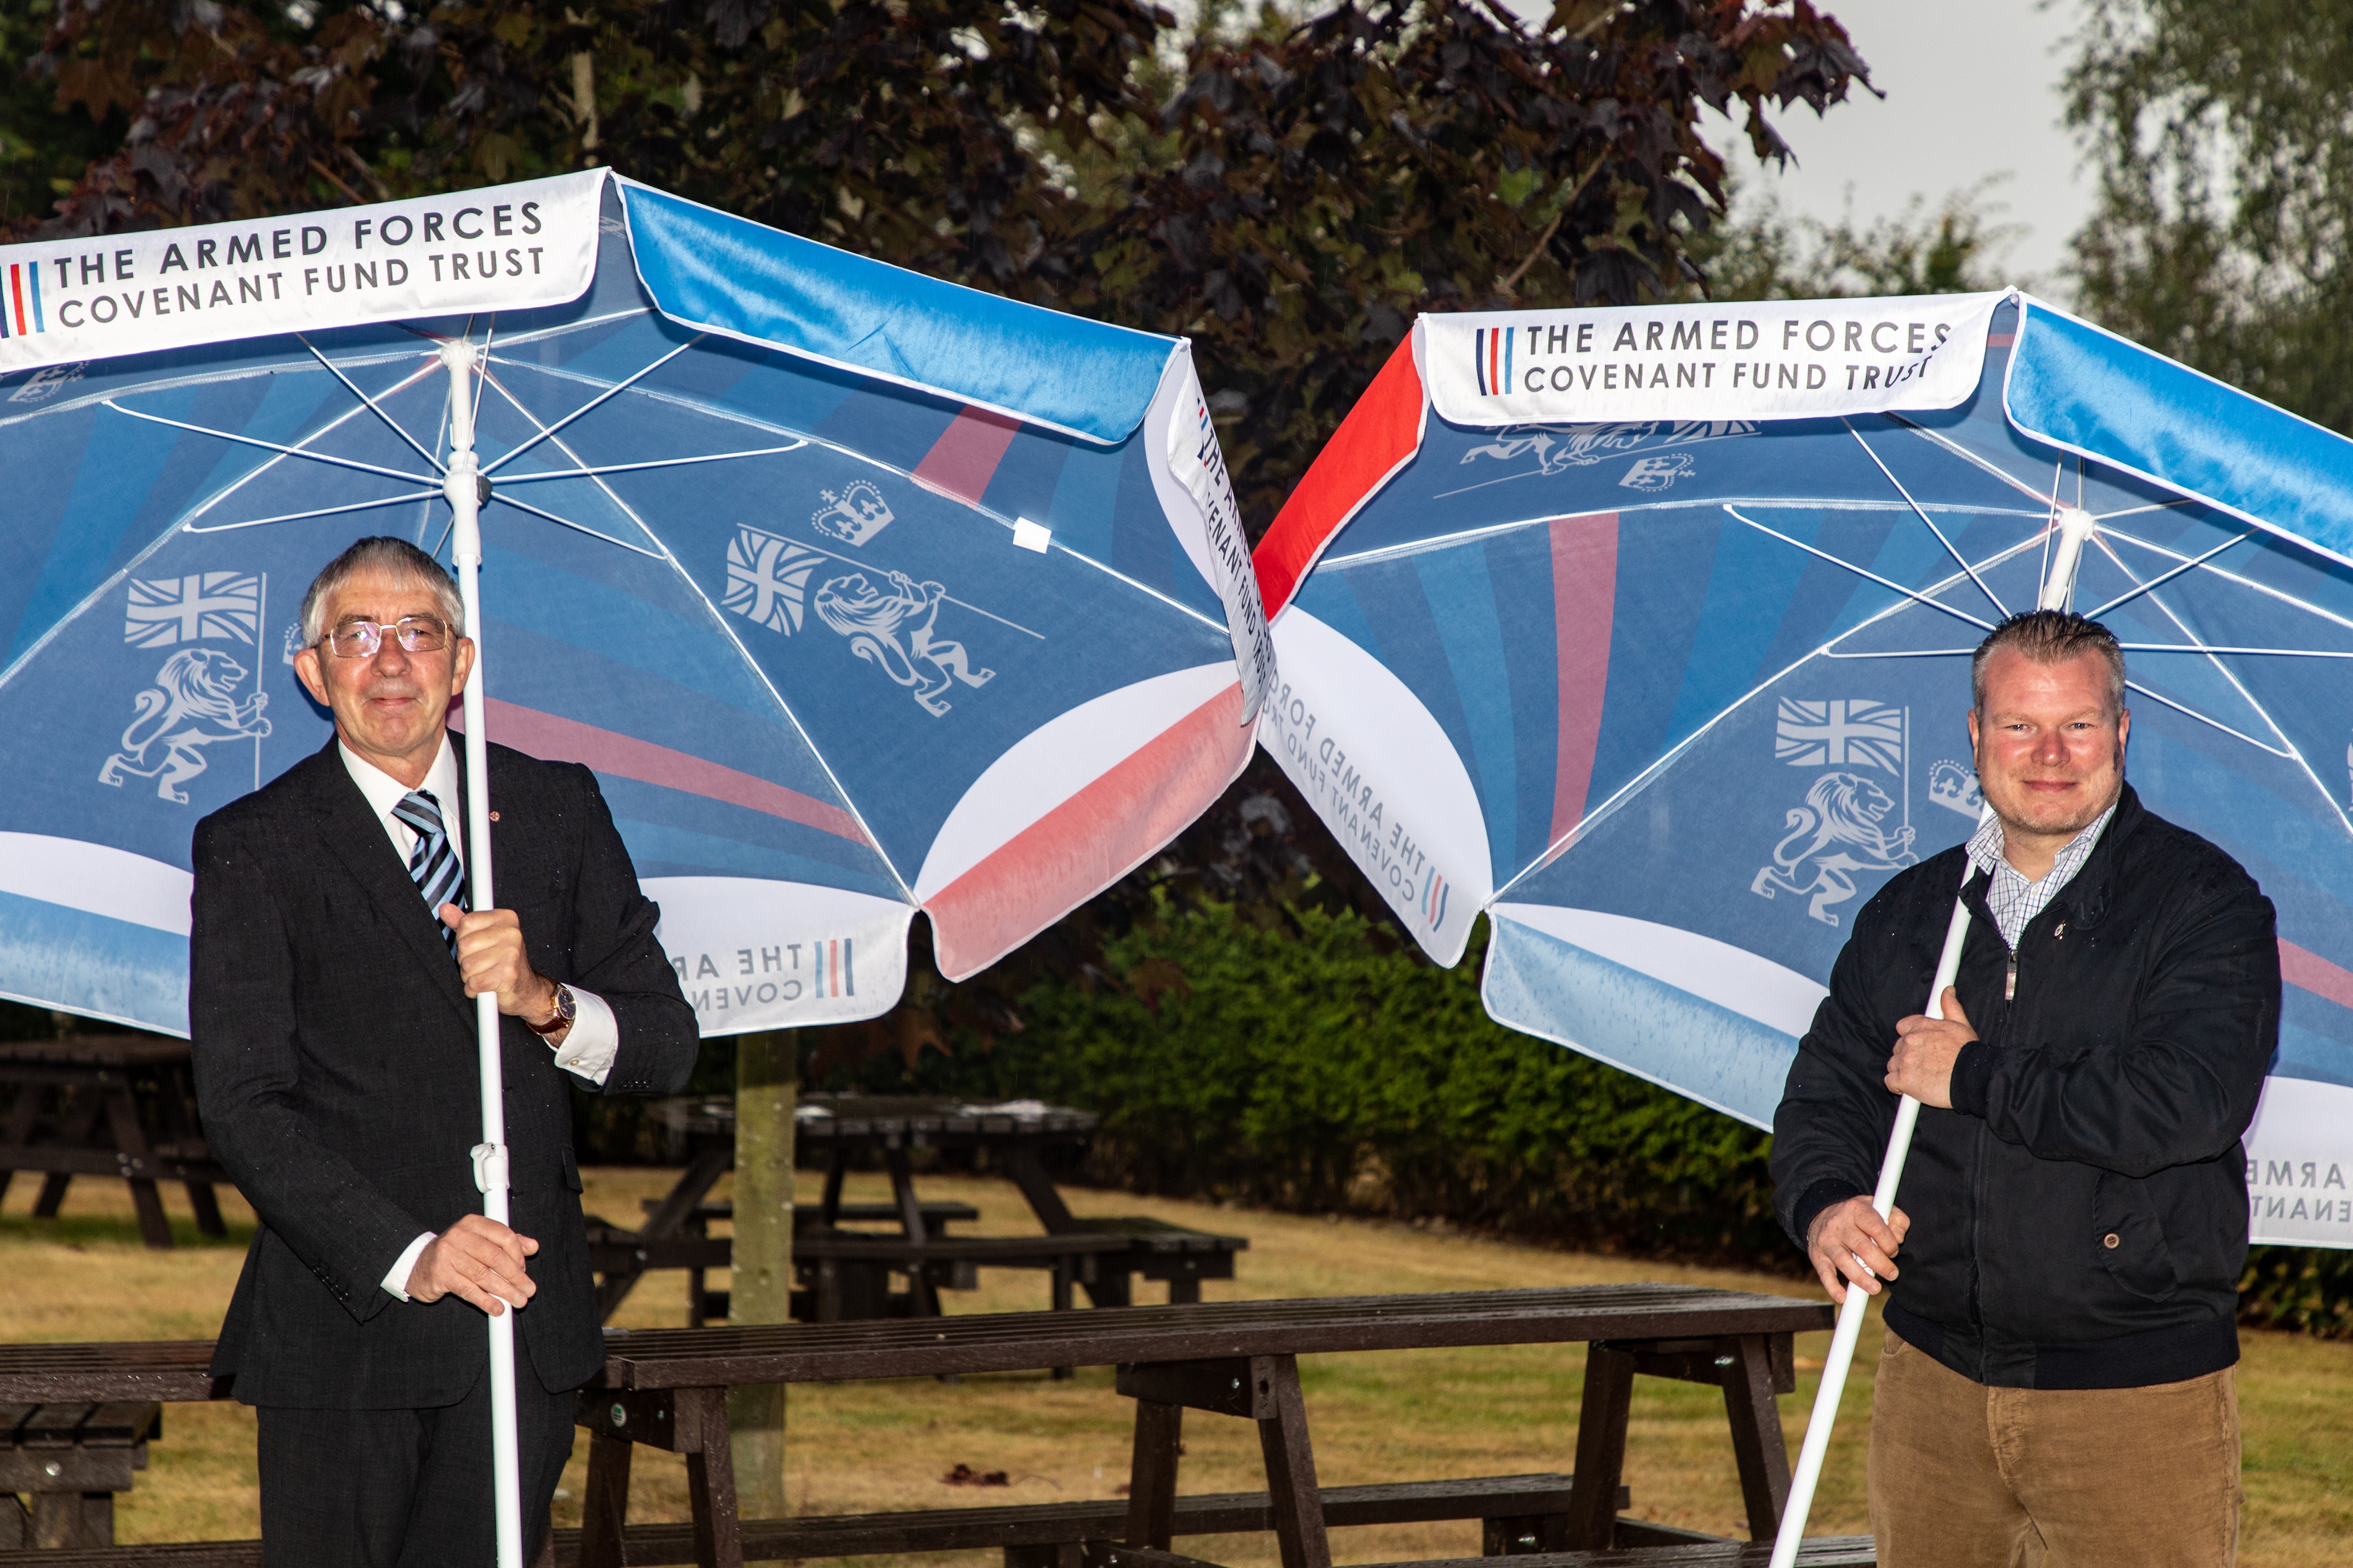 Mark Davis MBE and Thomas Kelly with the benches and parasols supplied by the Armed Forces Covenant Fund Trust